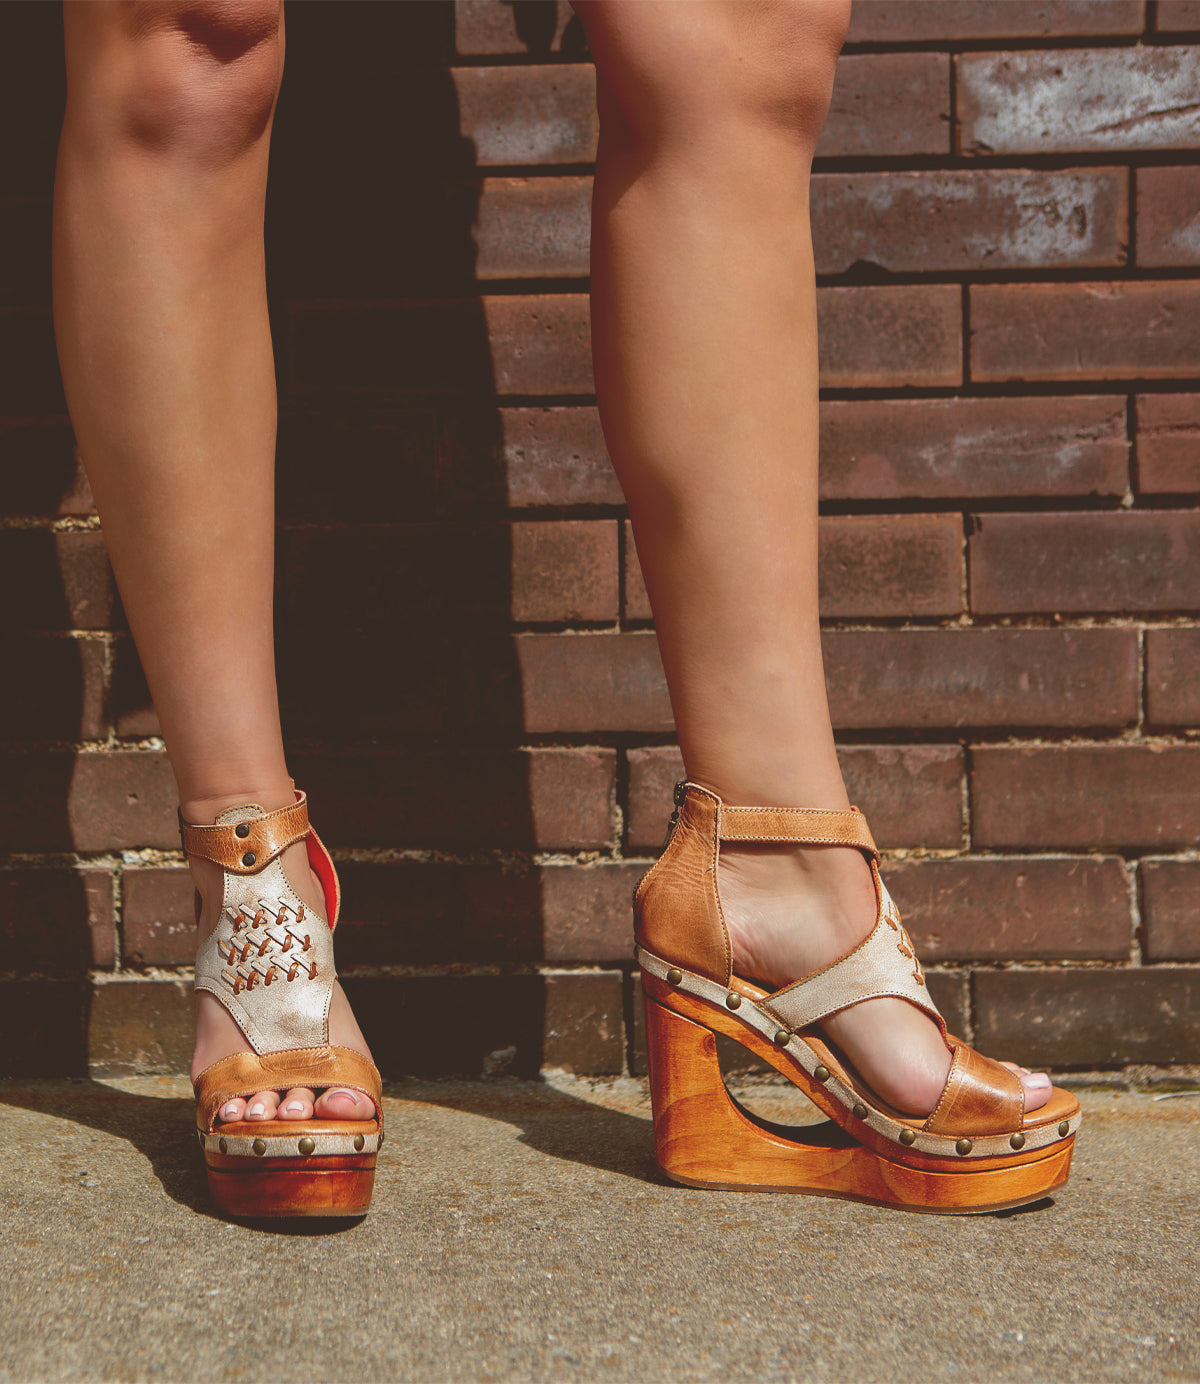 A person standing against a brick wall wearing brown Bed Stu Millennial t-strap front platform sandals.